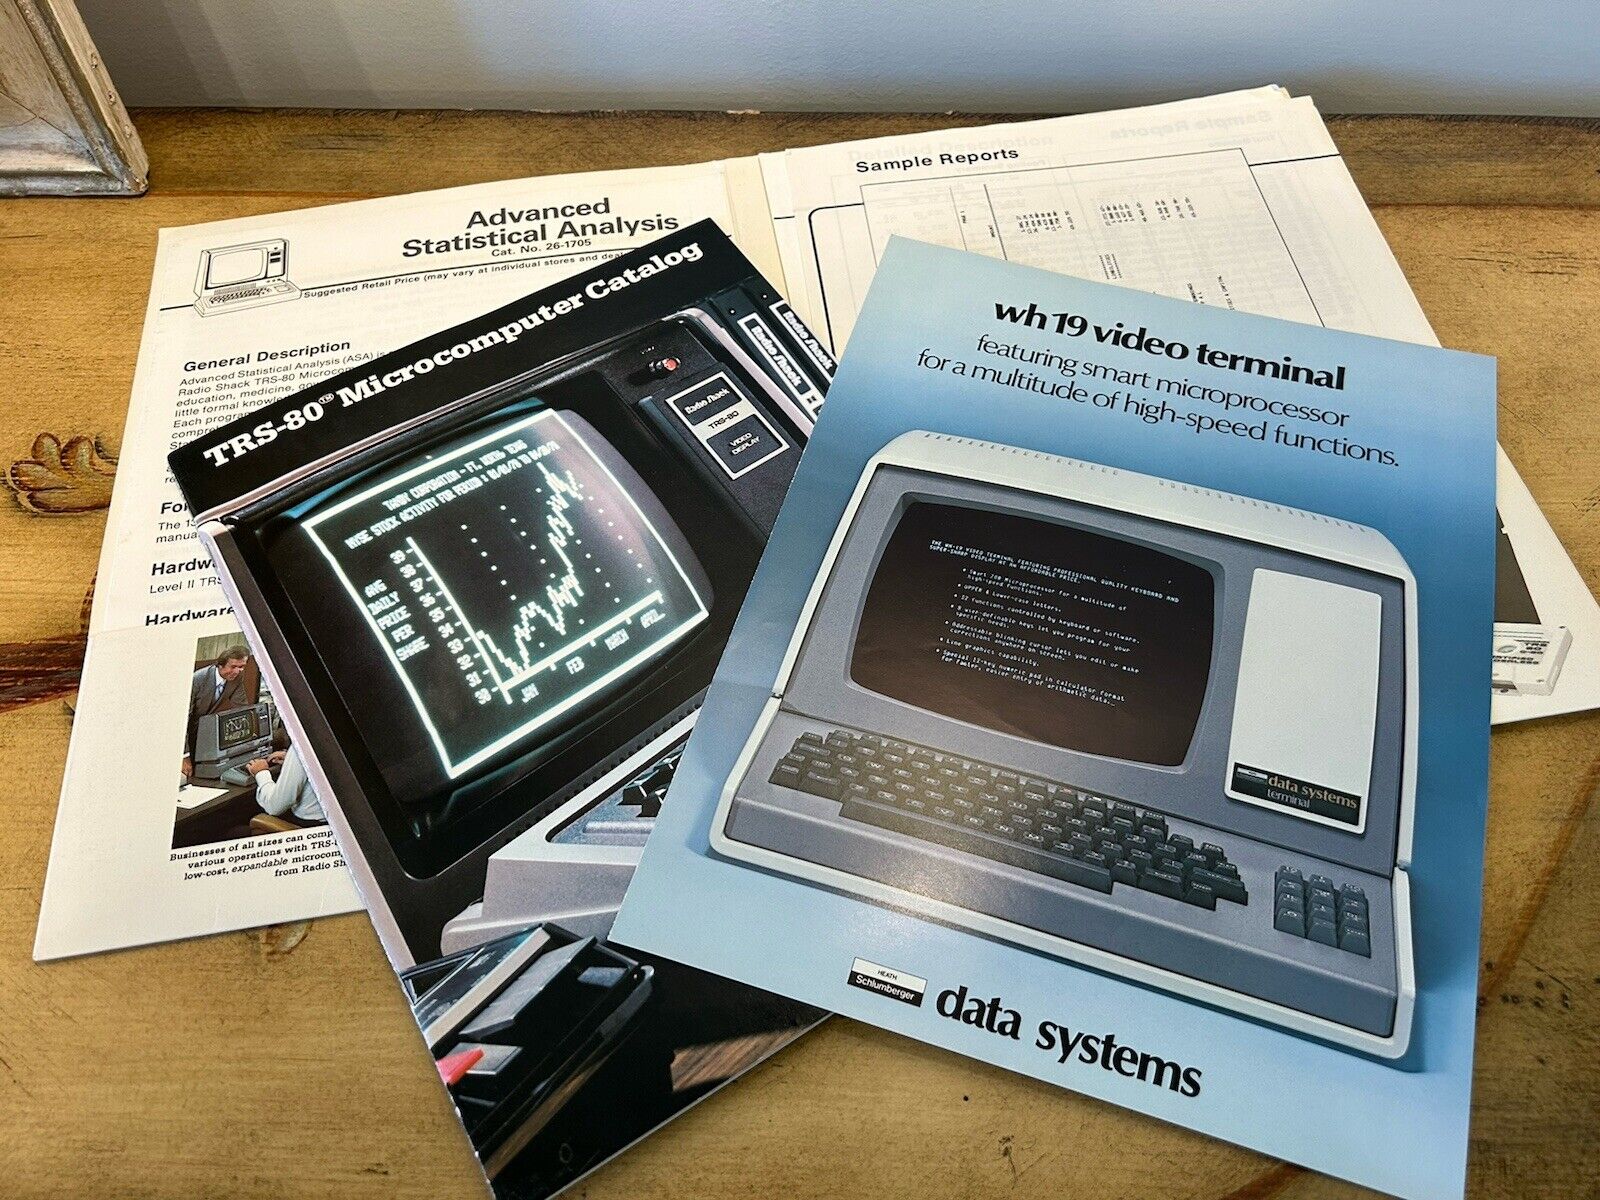 Radio Shack TRS-80 Microcomputer System Products (1978) - Vintage Catalog